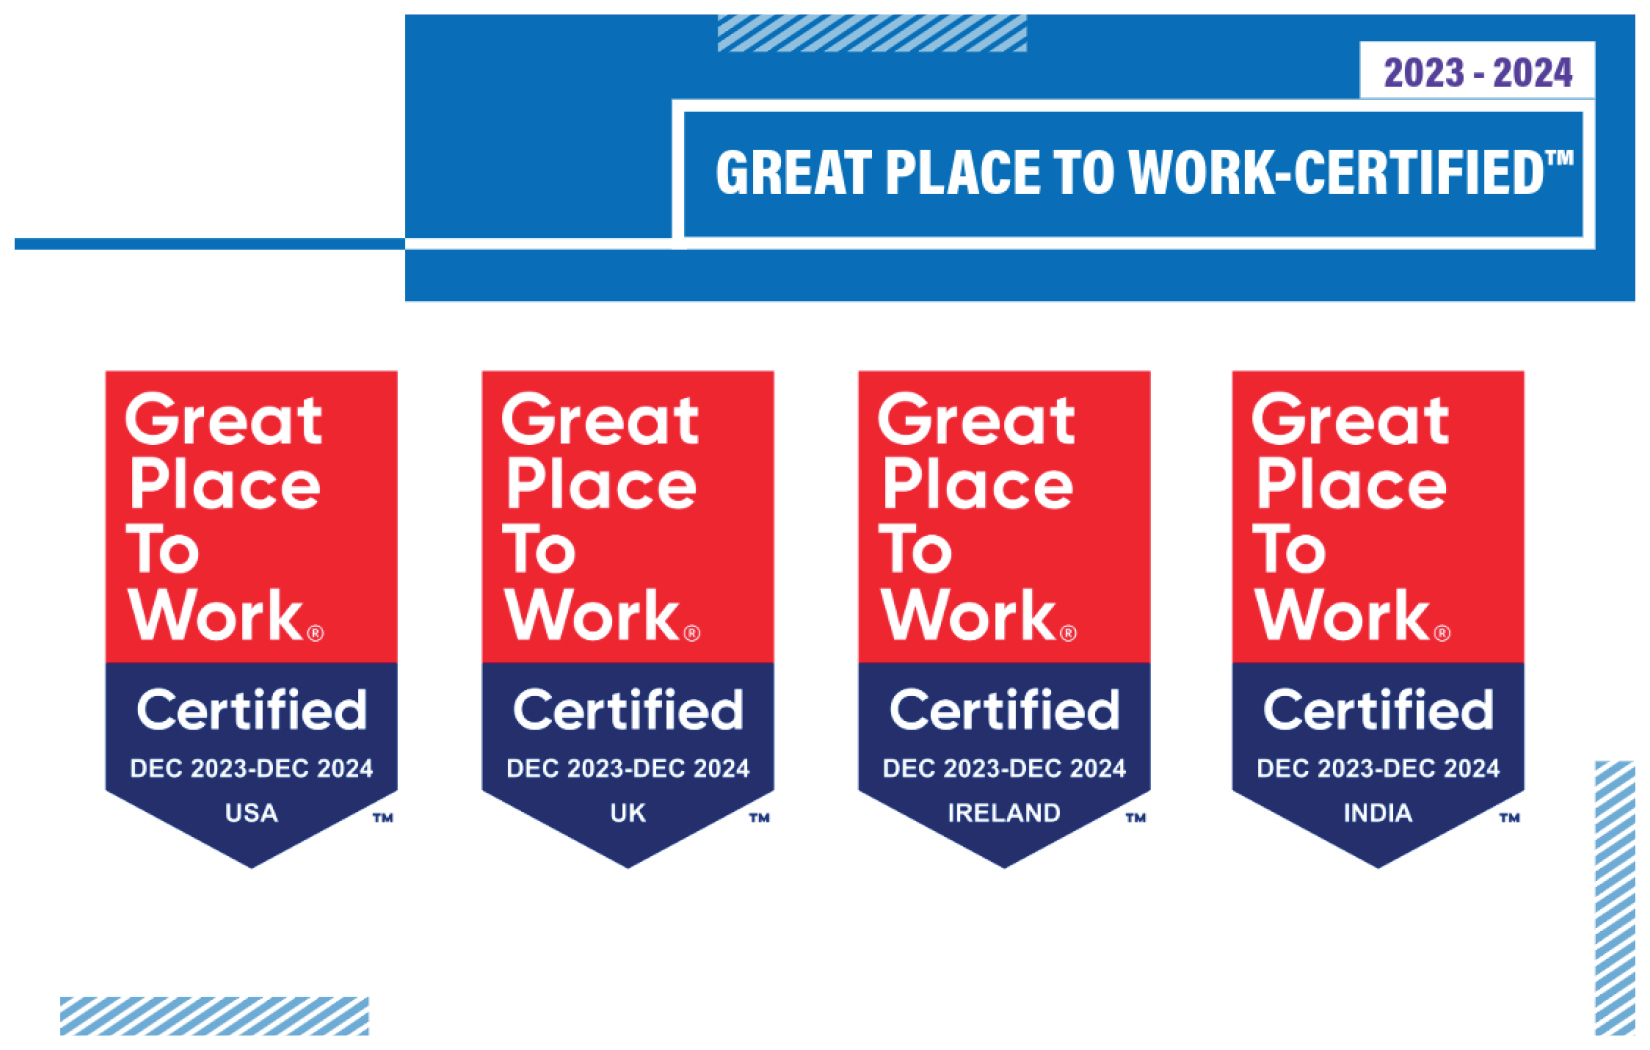 EquiLend Awarded Great Place to Work Certification